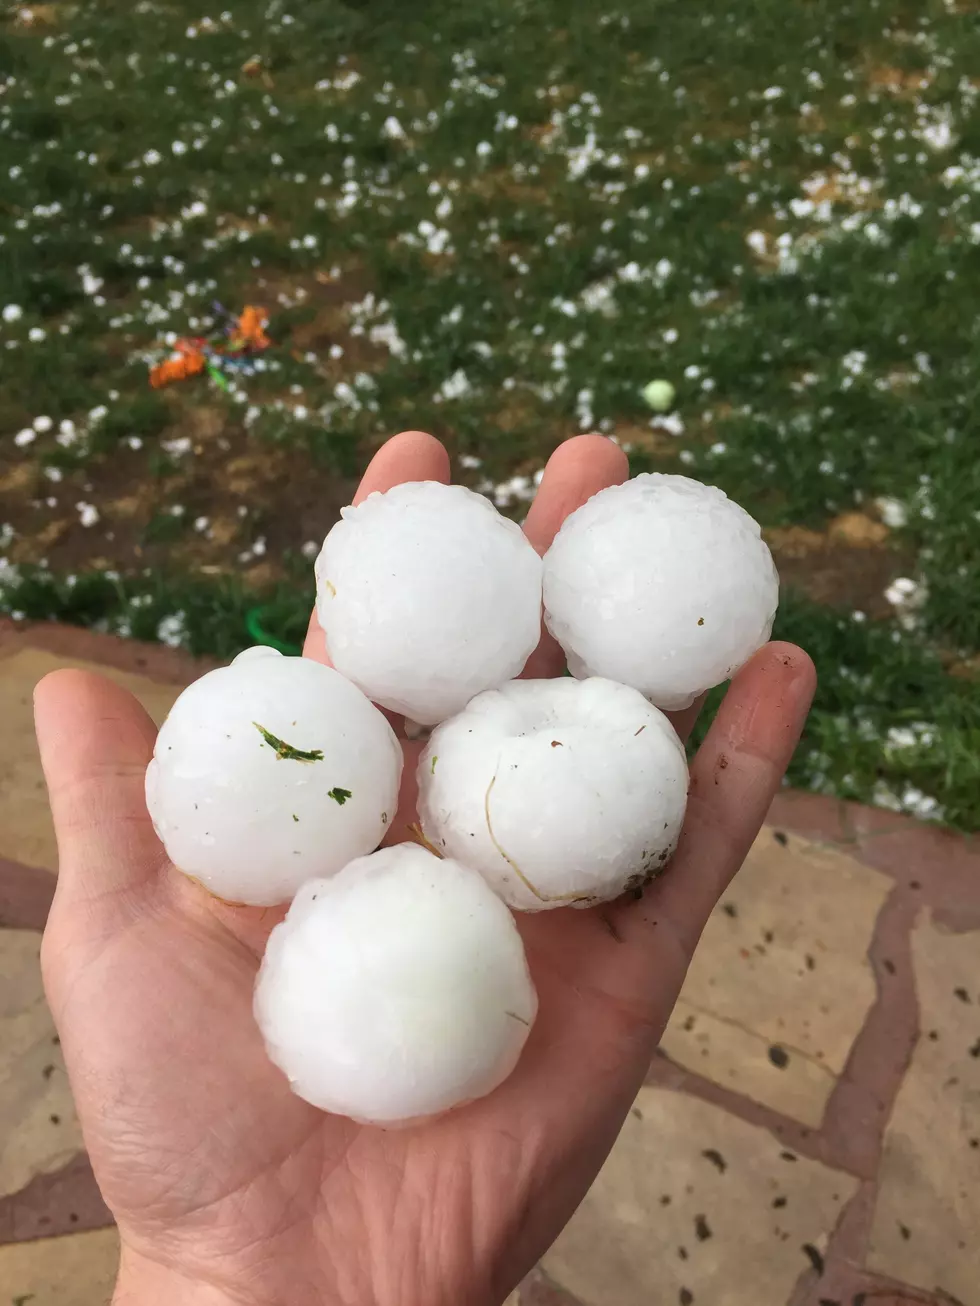 Check Out These Hail Stones Larger Than Golf Balls